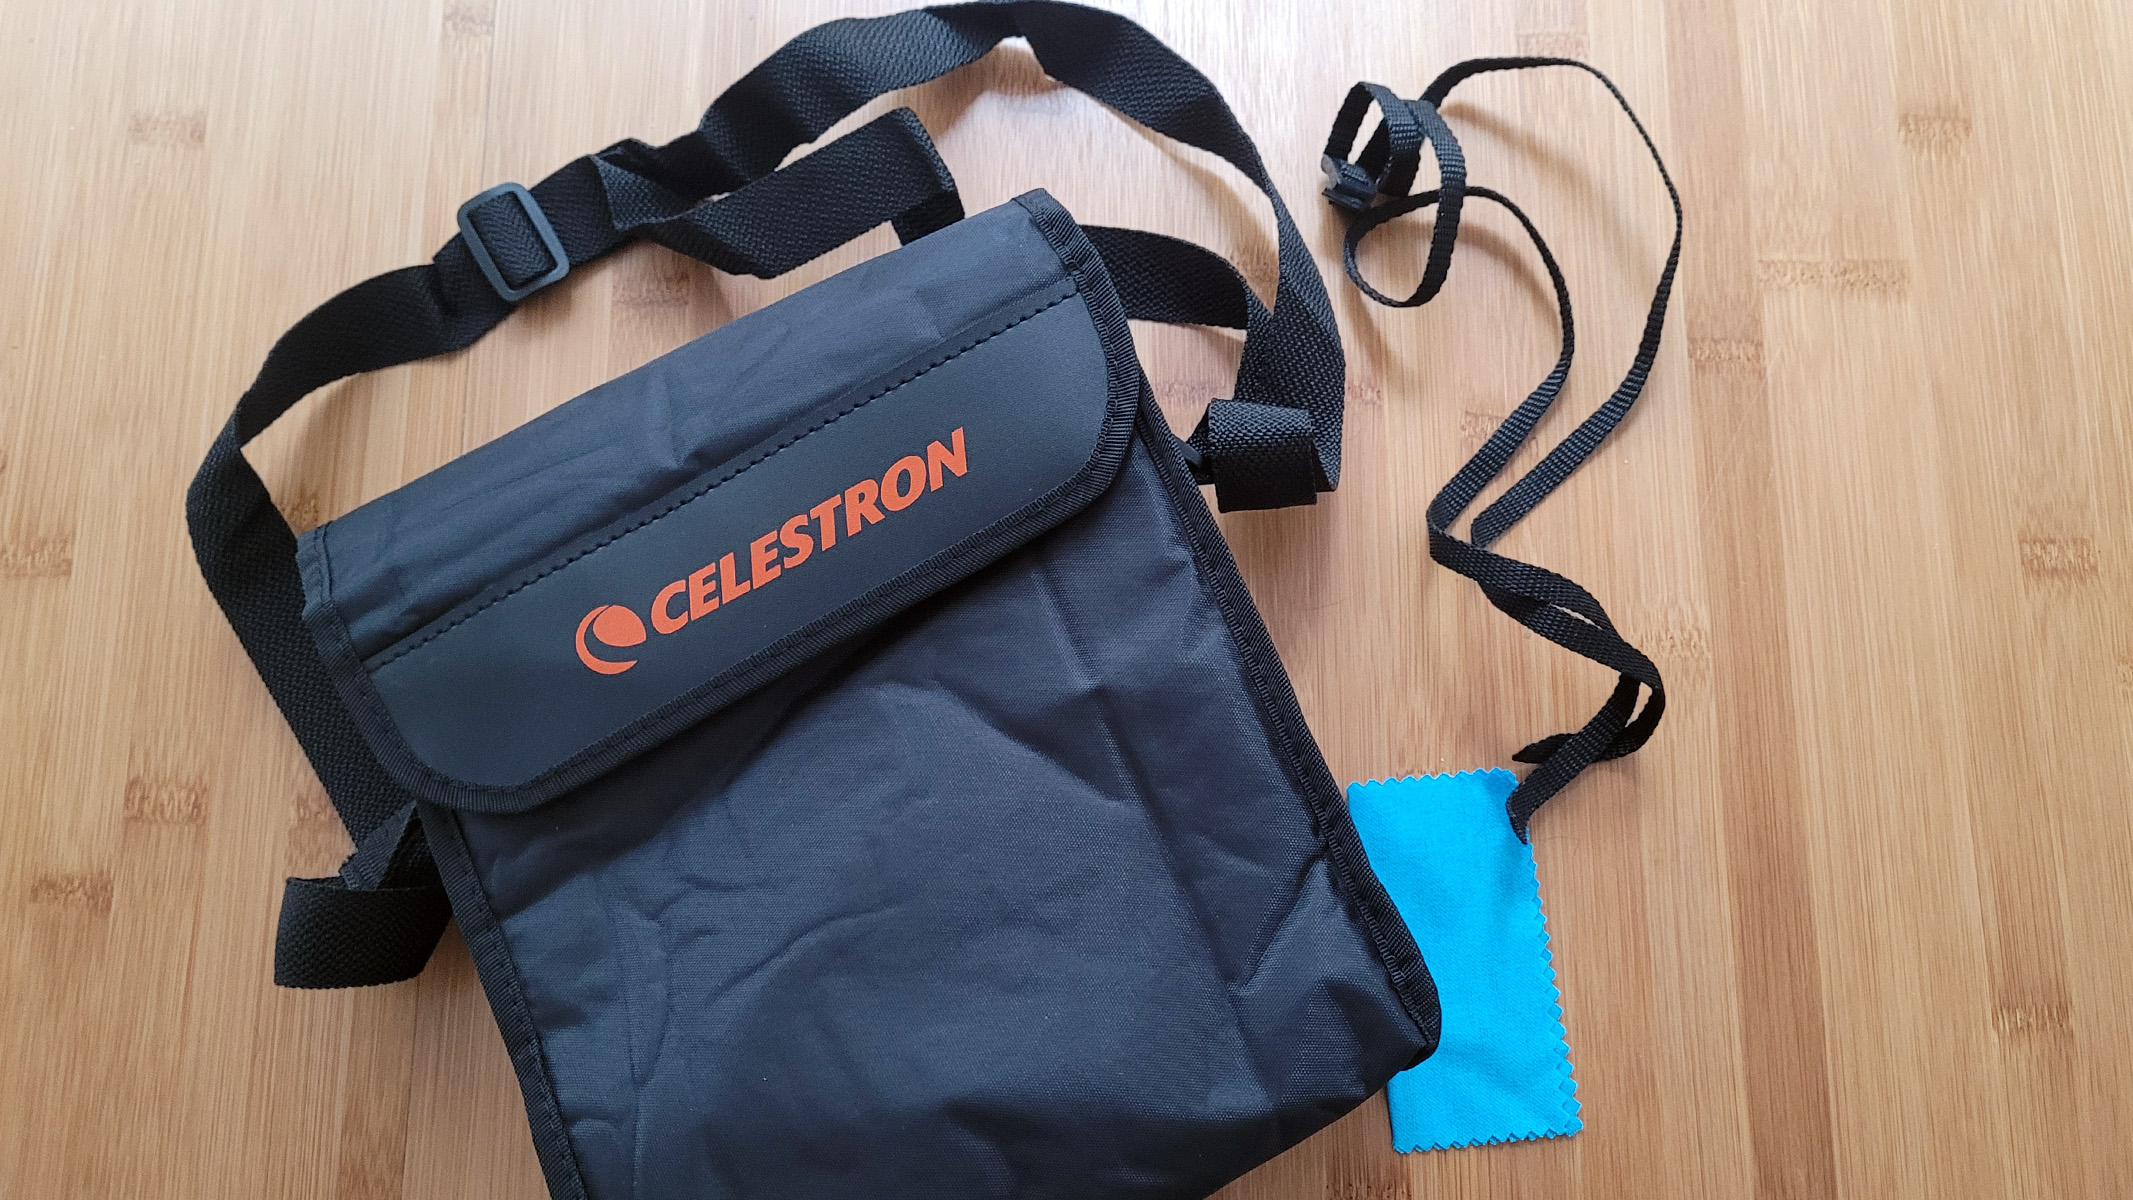 A photo showing the equipment that will come with the Celestron SkyMaster 12x60